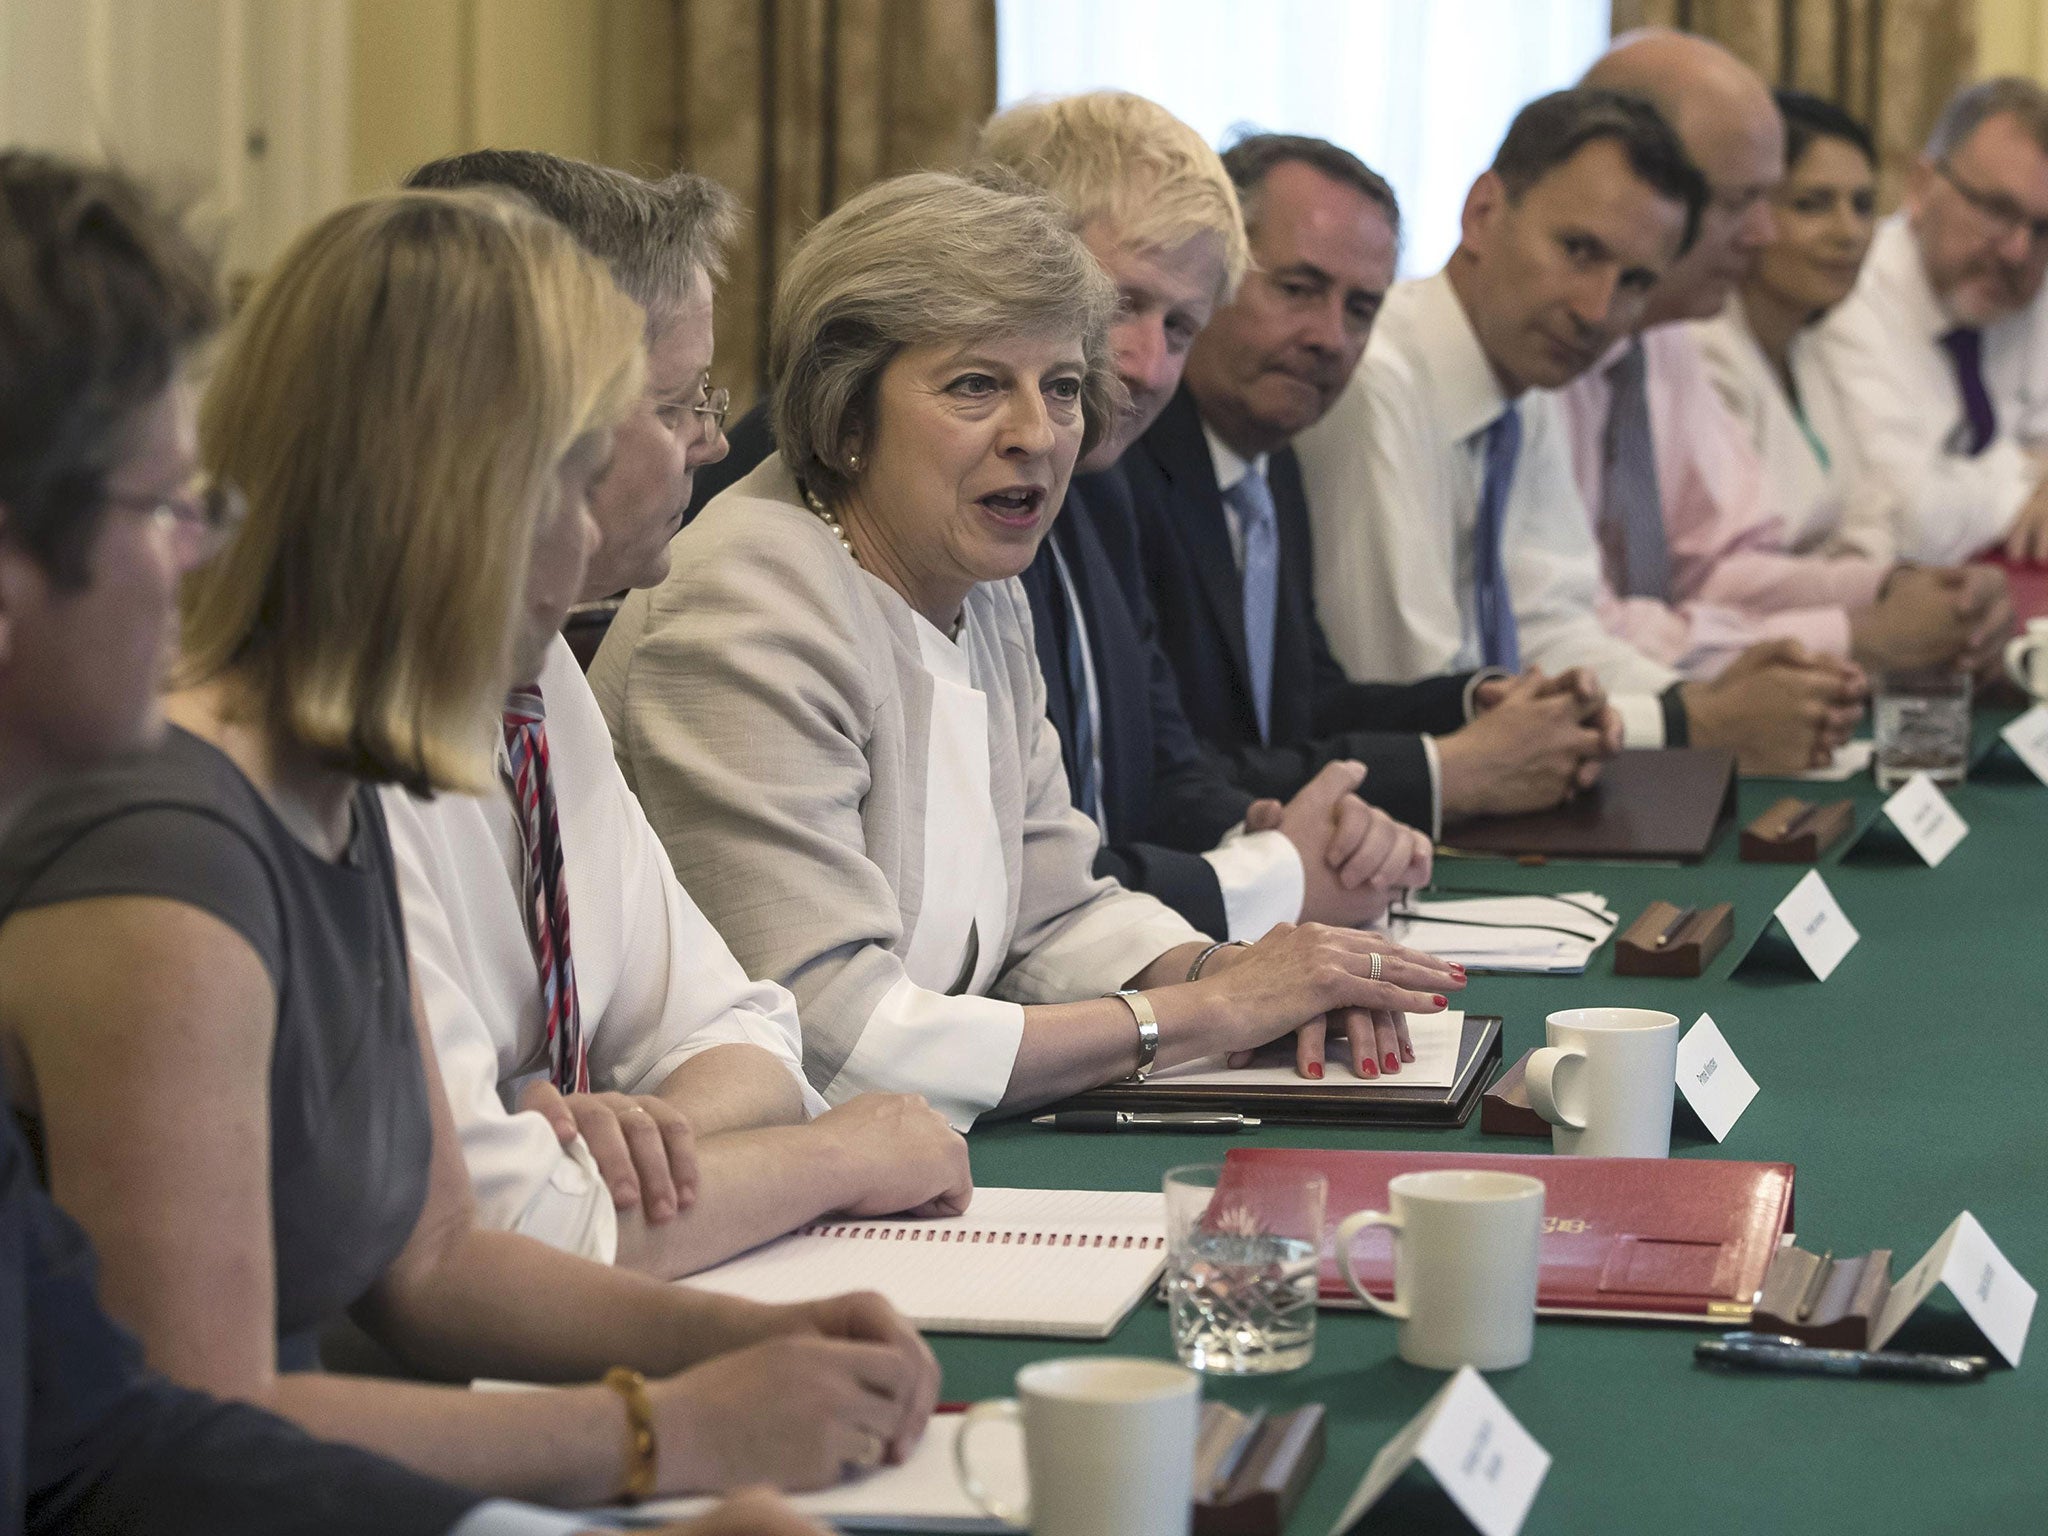 Britain's Prime Minister Theresa May (C) holds her first Cabinet Meeting at Downing Street, in London July 19, 2016